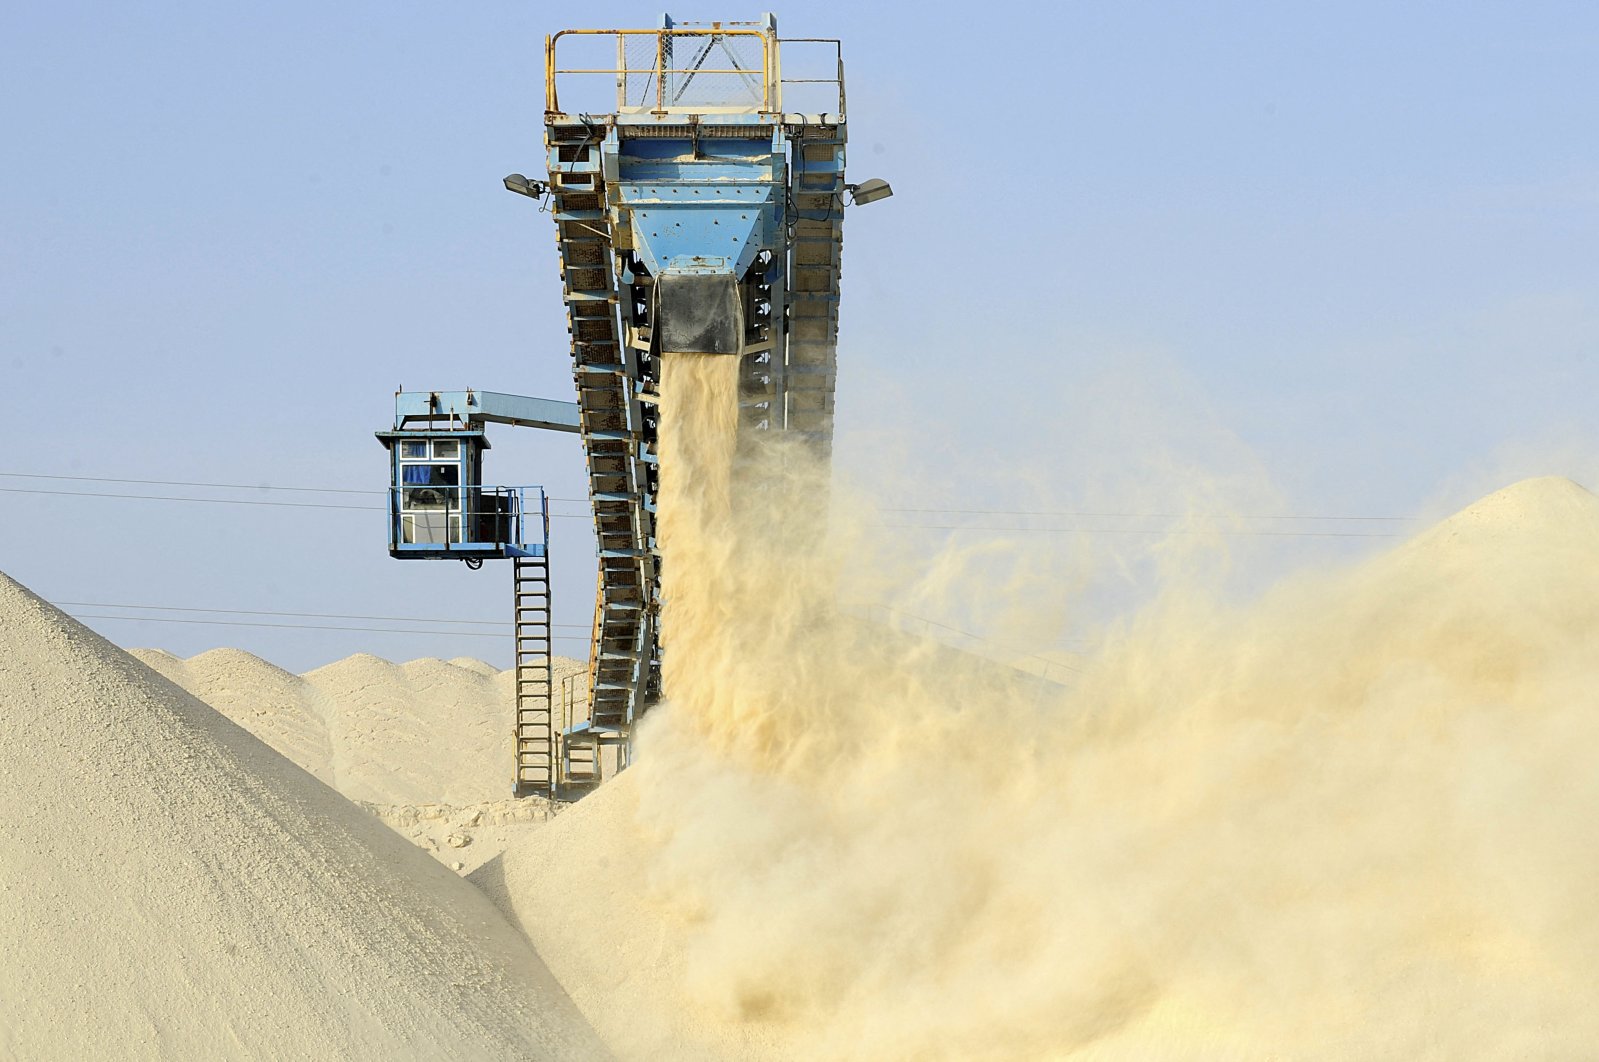 This file photo shows untreated phosphate being dropped off on a mountain at the end of a conveyor belt at the Marca factory of the national Moroccan phosphates company OCP, near Laayoune, the main city of Moroccan-controlled Western Sahara, May 13, 2013. (AFP Photo)